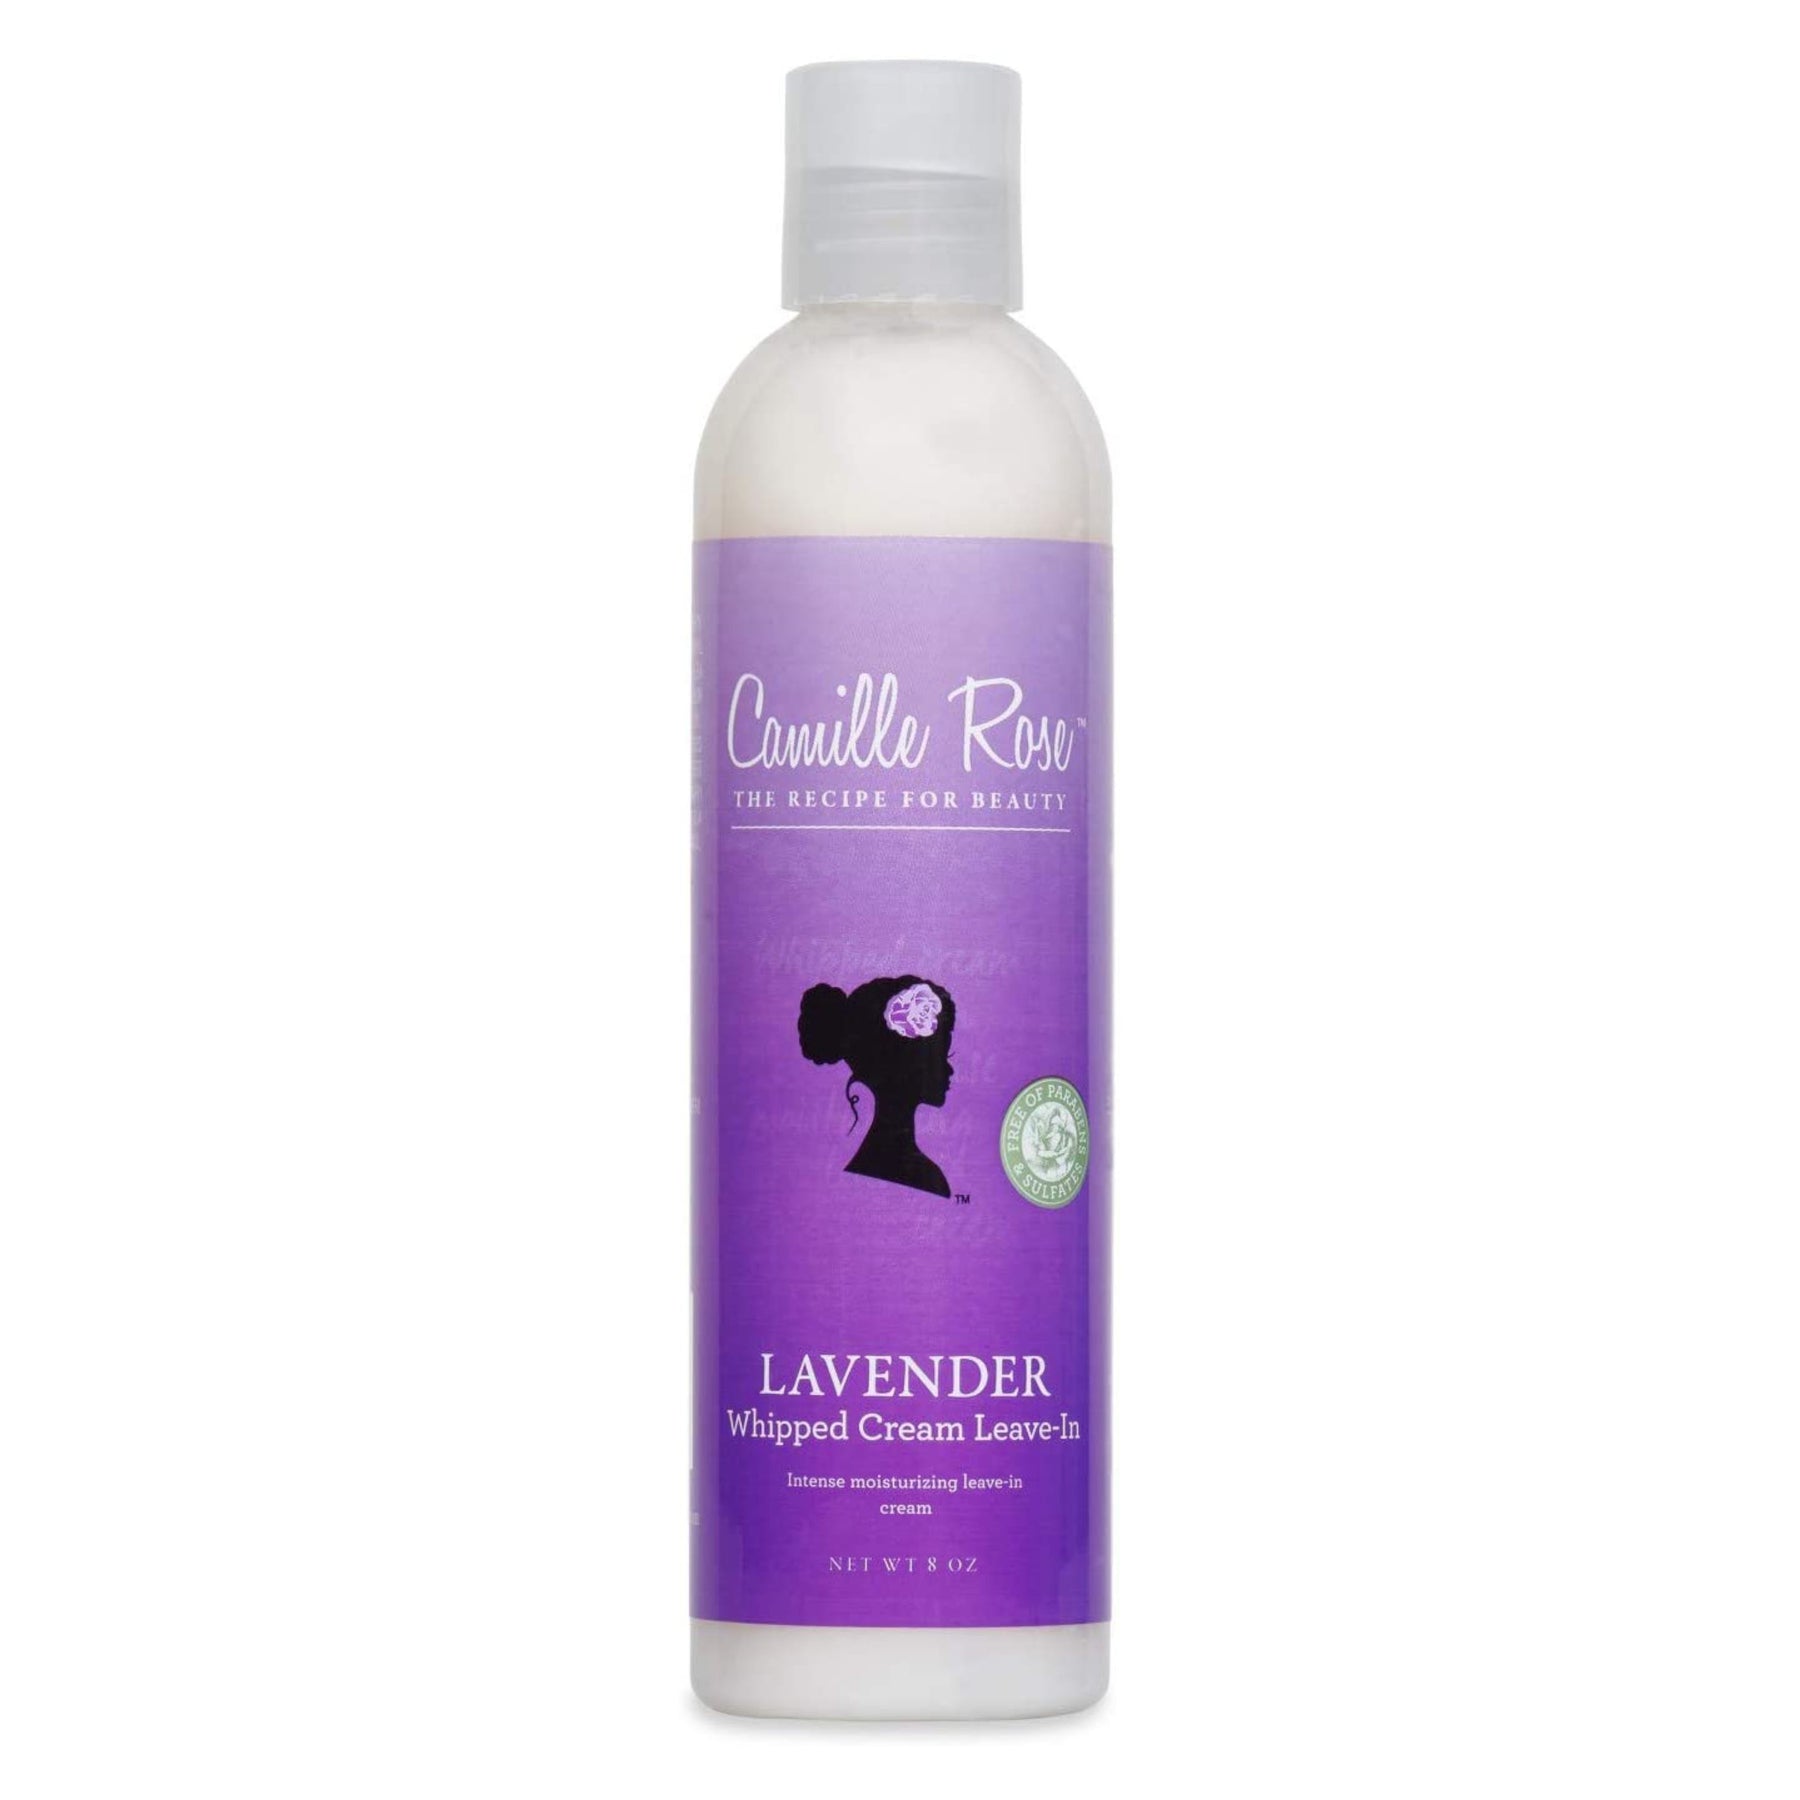 Camille Rose Naturals Lavender Whipped Leave In Moisturising Cream 8 oz- AQ Online